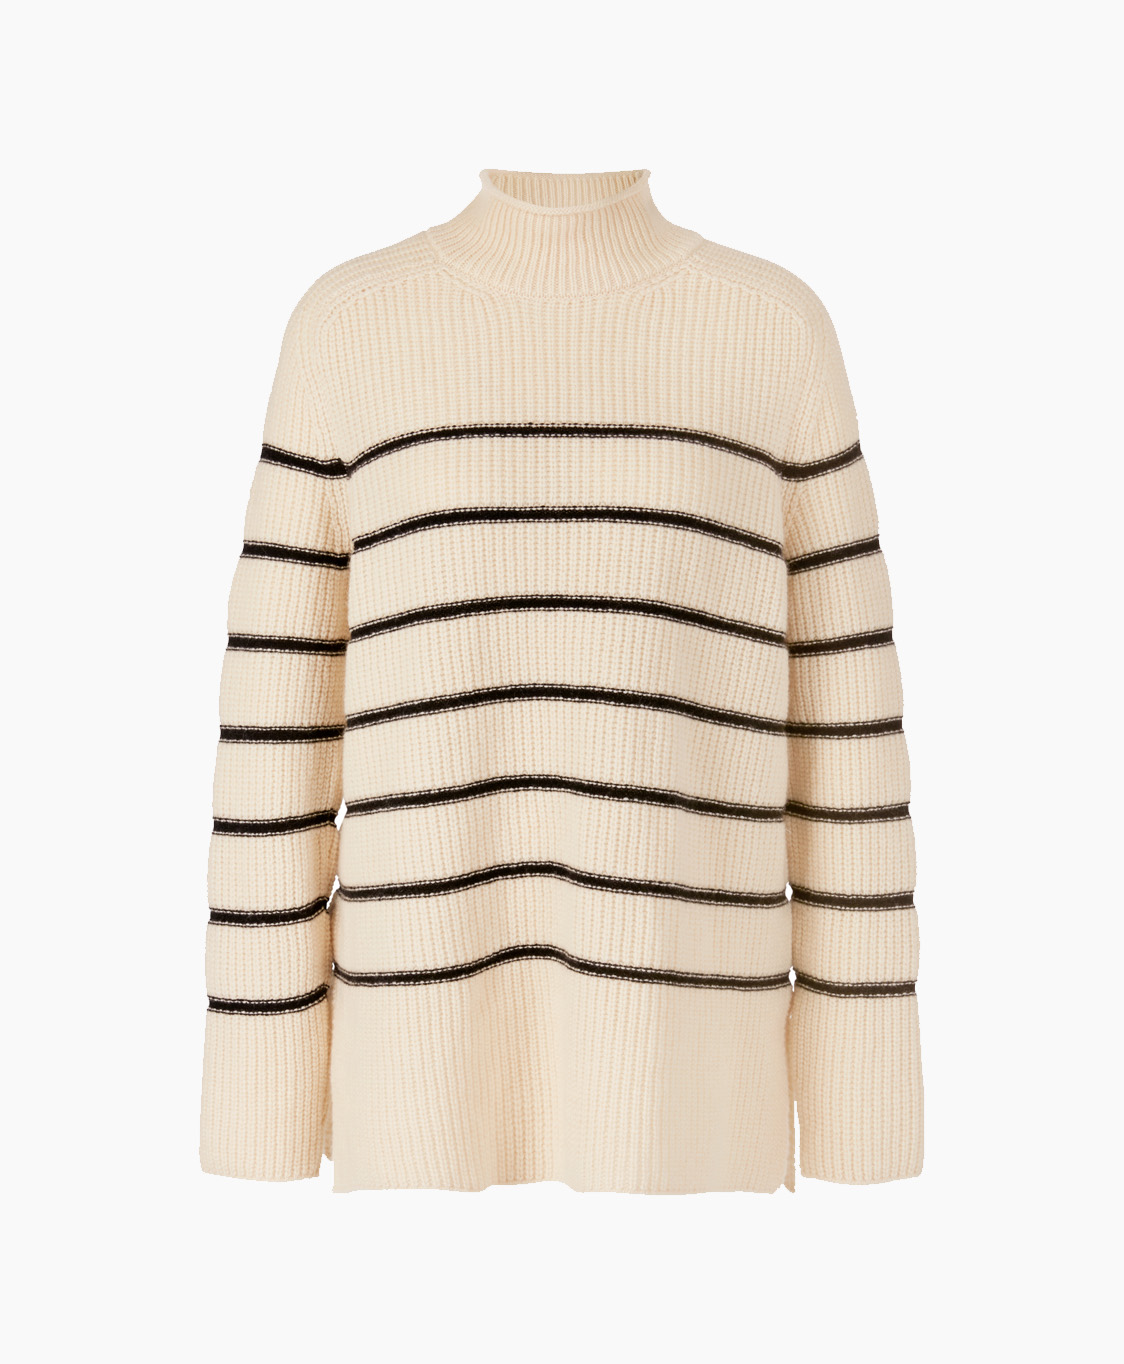 Marccain Collectie Pullover Uc 41.14 M07 Room